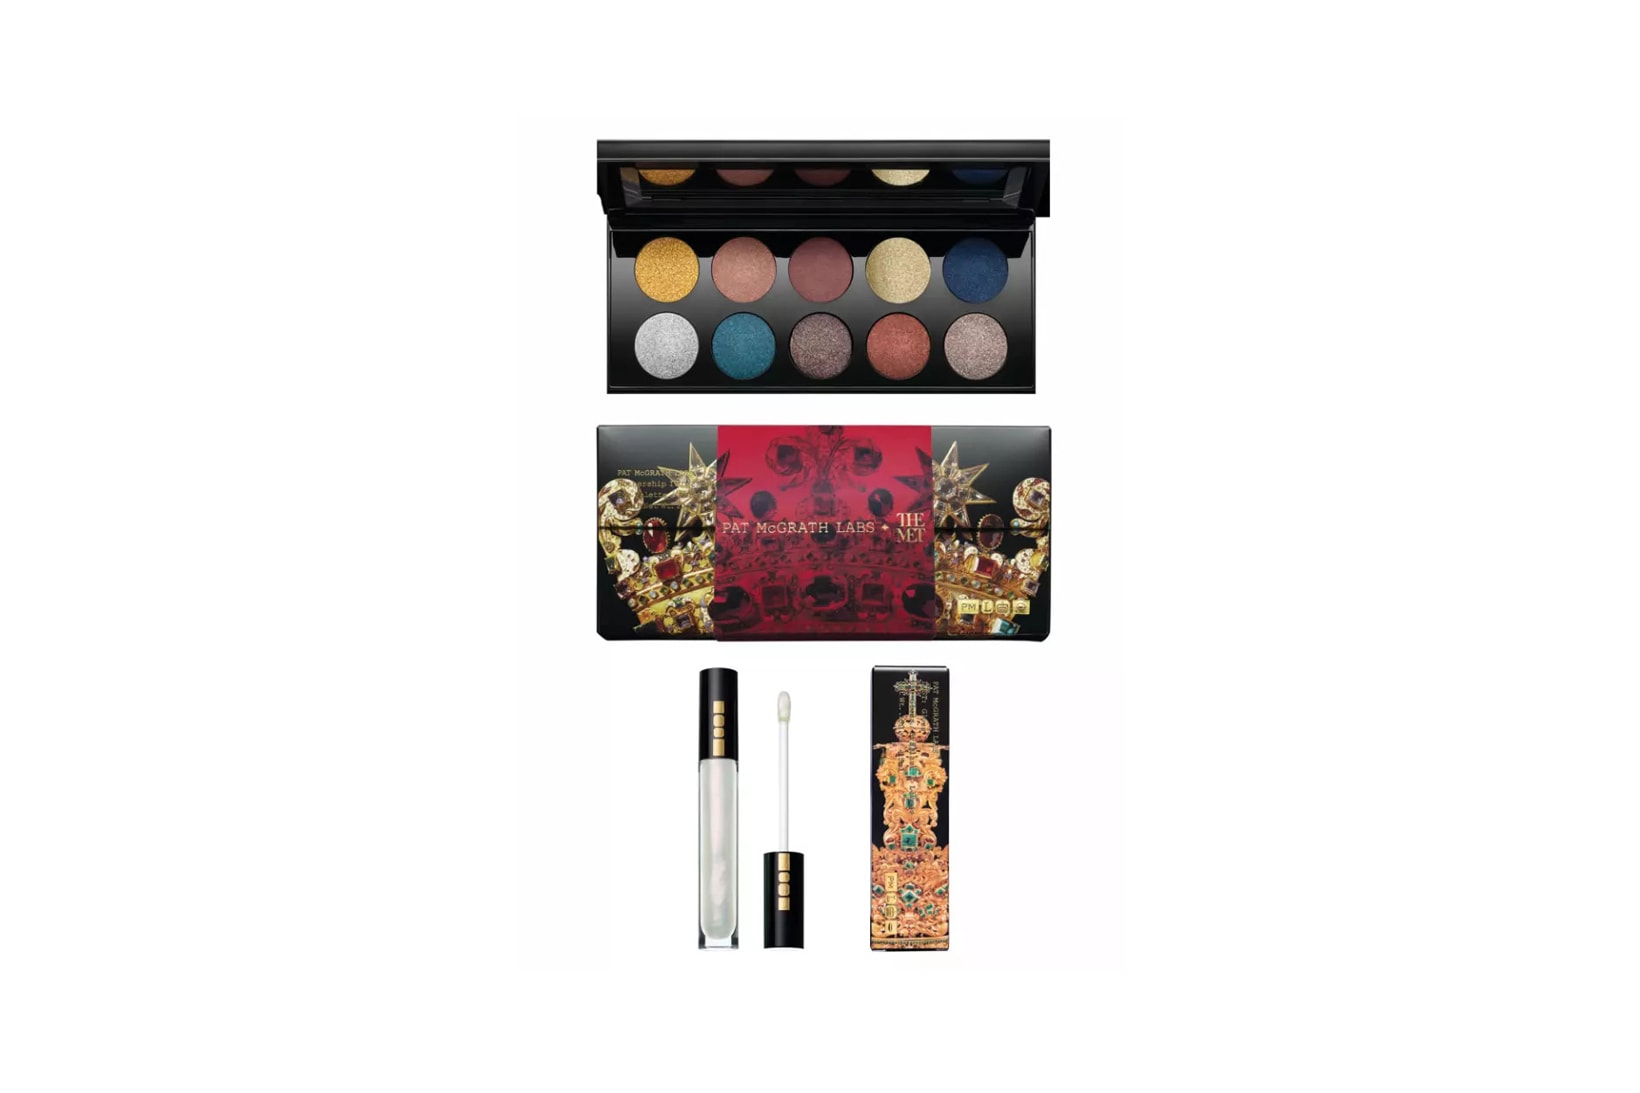 Pat McGrath Labs x The Met Collection Mothership IV: Decadence Eyeshadow Palette LUST Lip Gloss Aliengelic